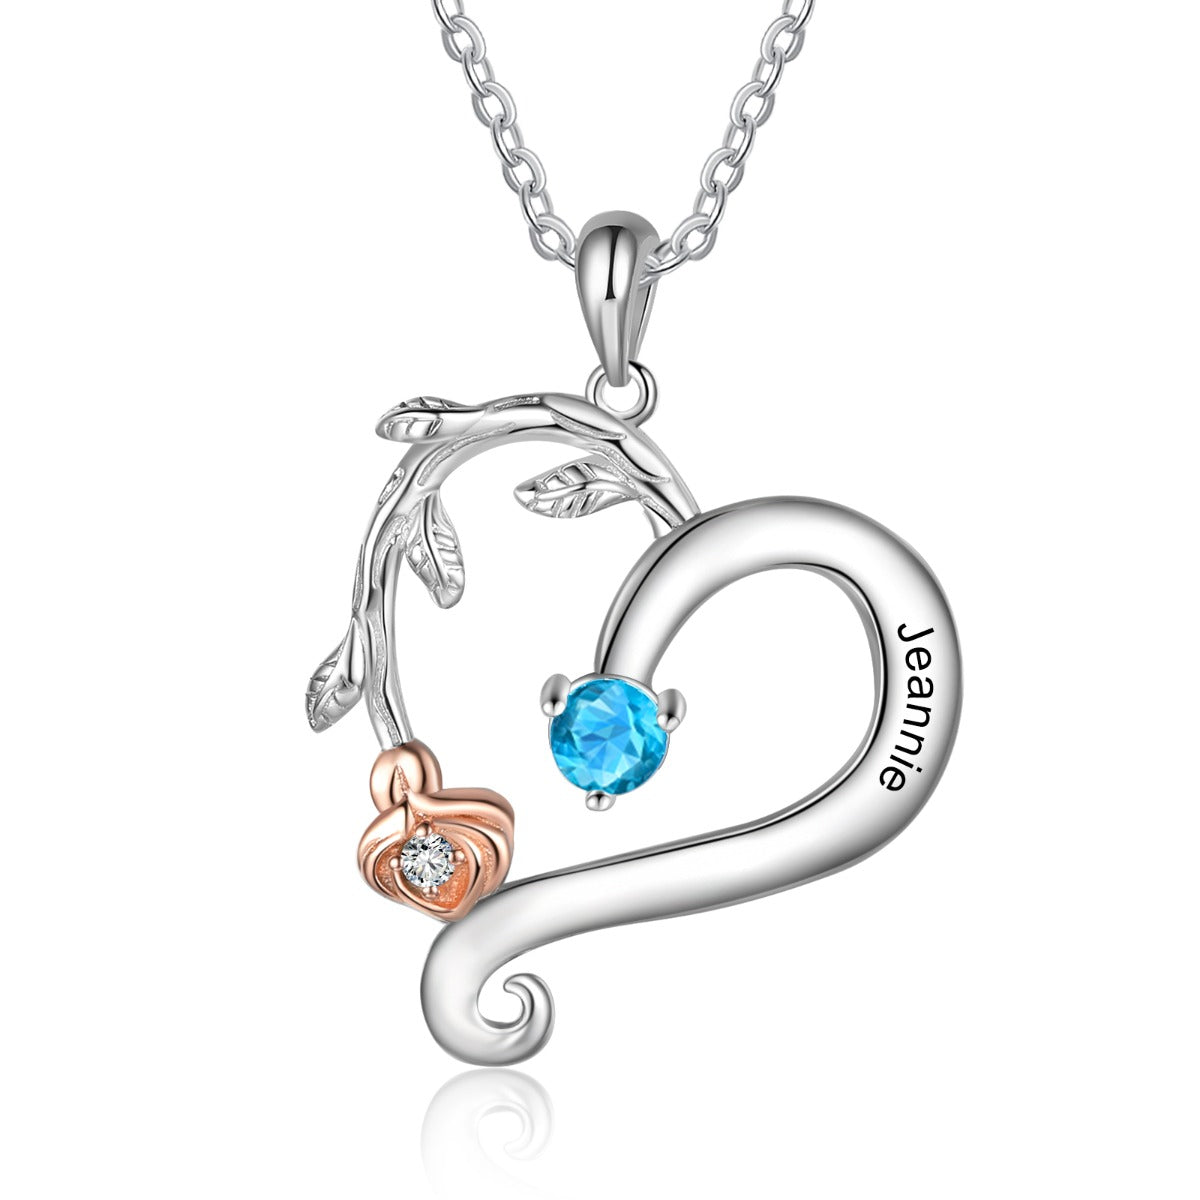 Engraved Rose Flower Heart Pendant Necklace with Birthstones